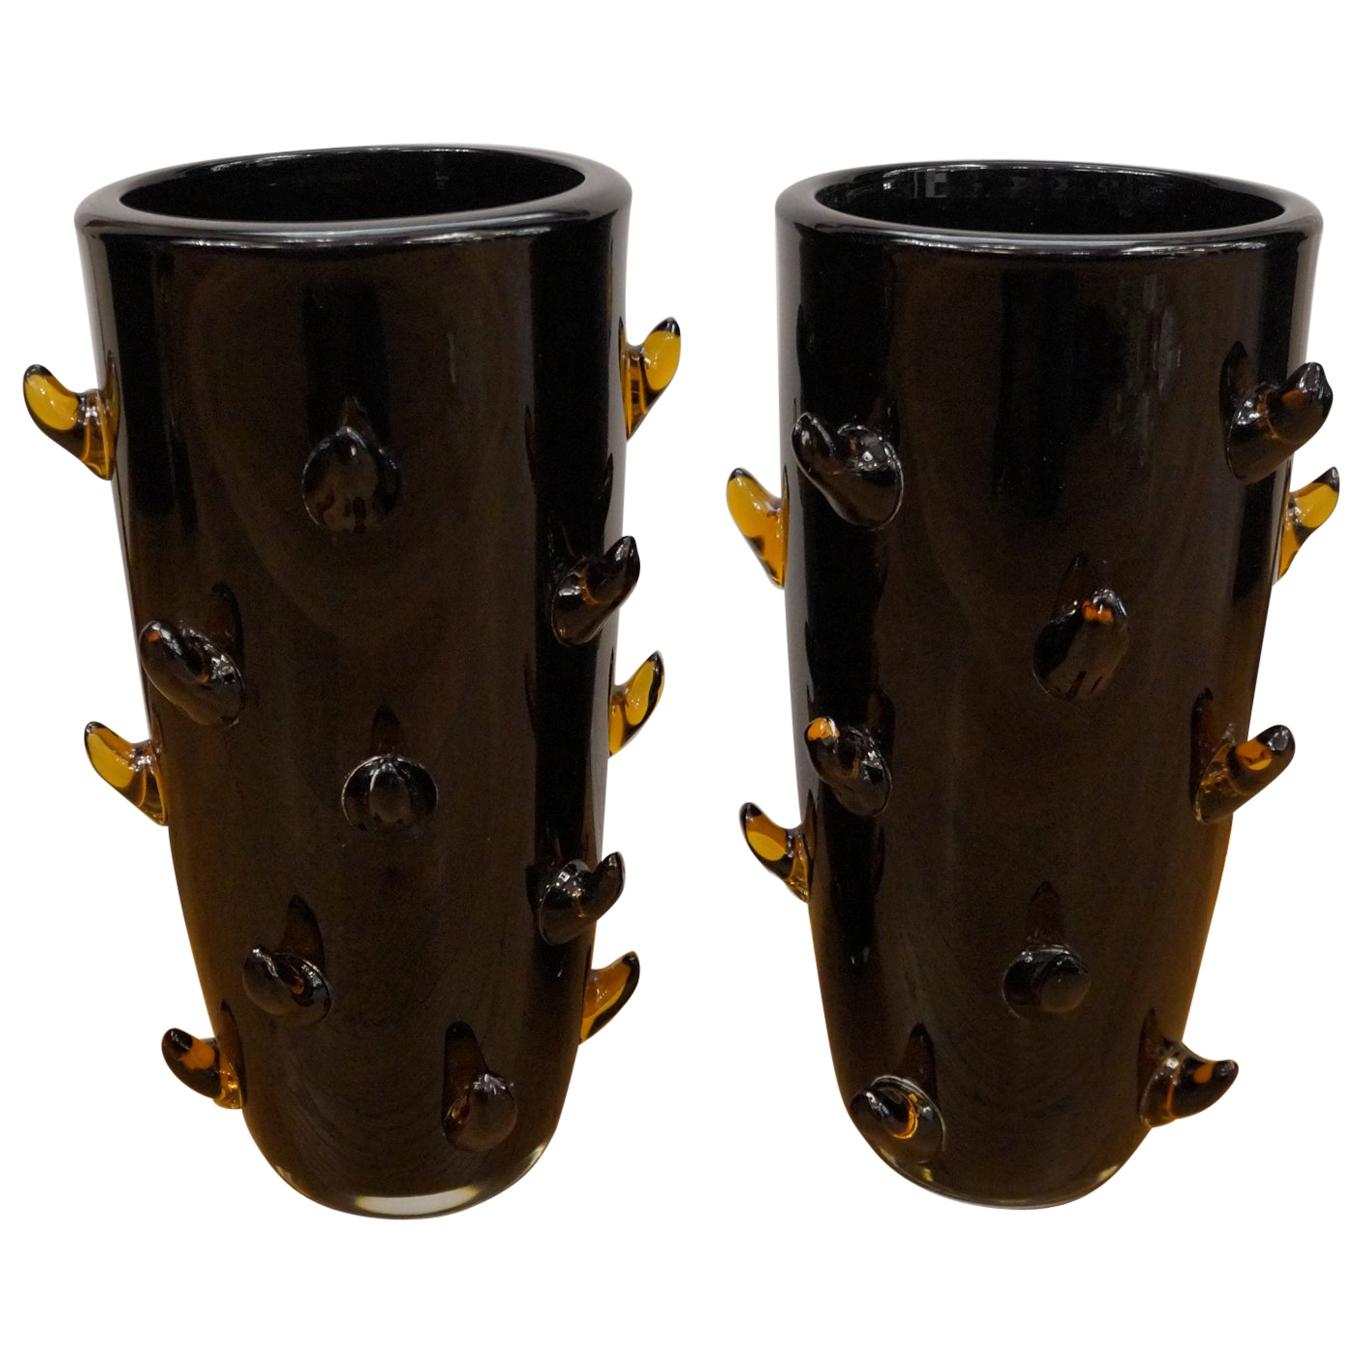 Toso Mid-Century Modern Black Amber Pair of Murano Glass Vases Signed Jars, 1988